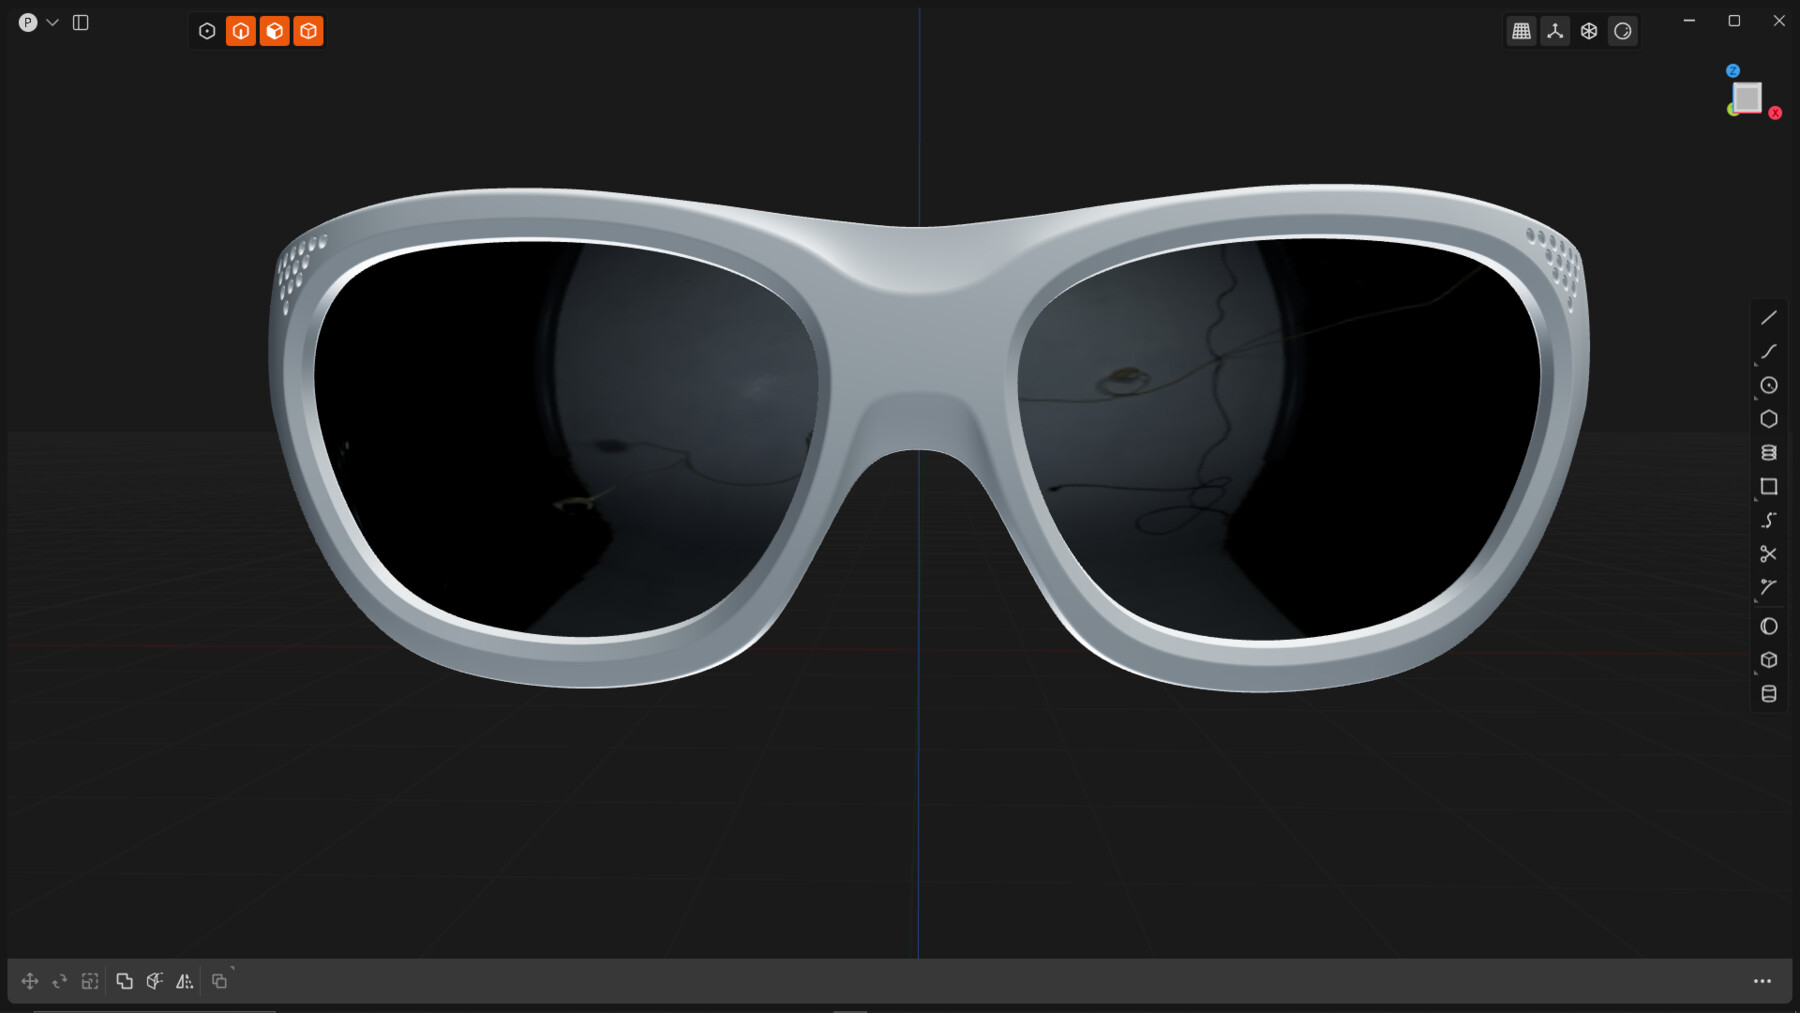 ArtStation - Plasticity 3D Tricky Glasses course full of tips and triks!